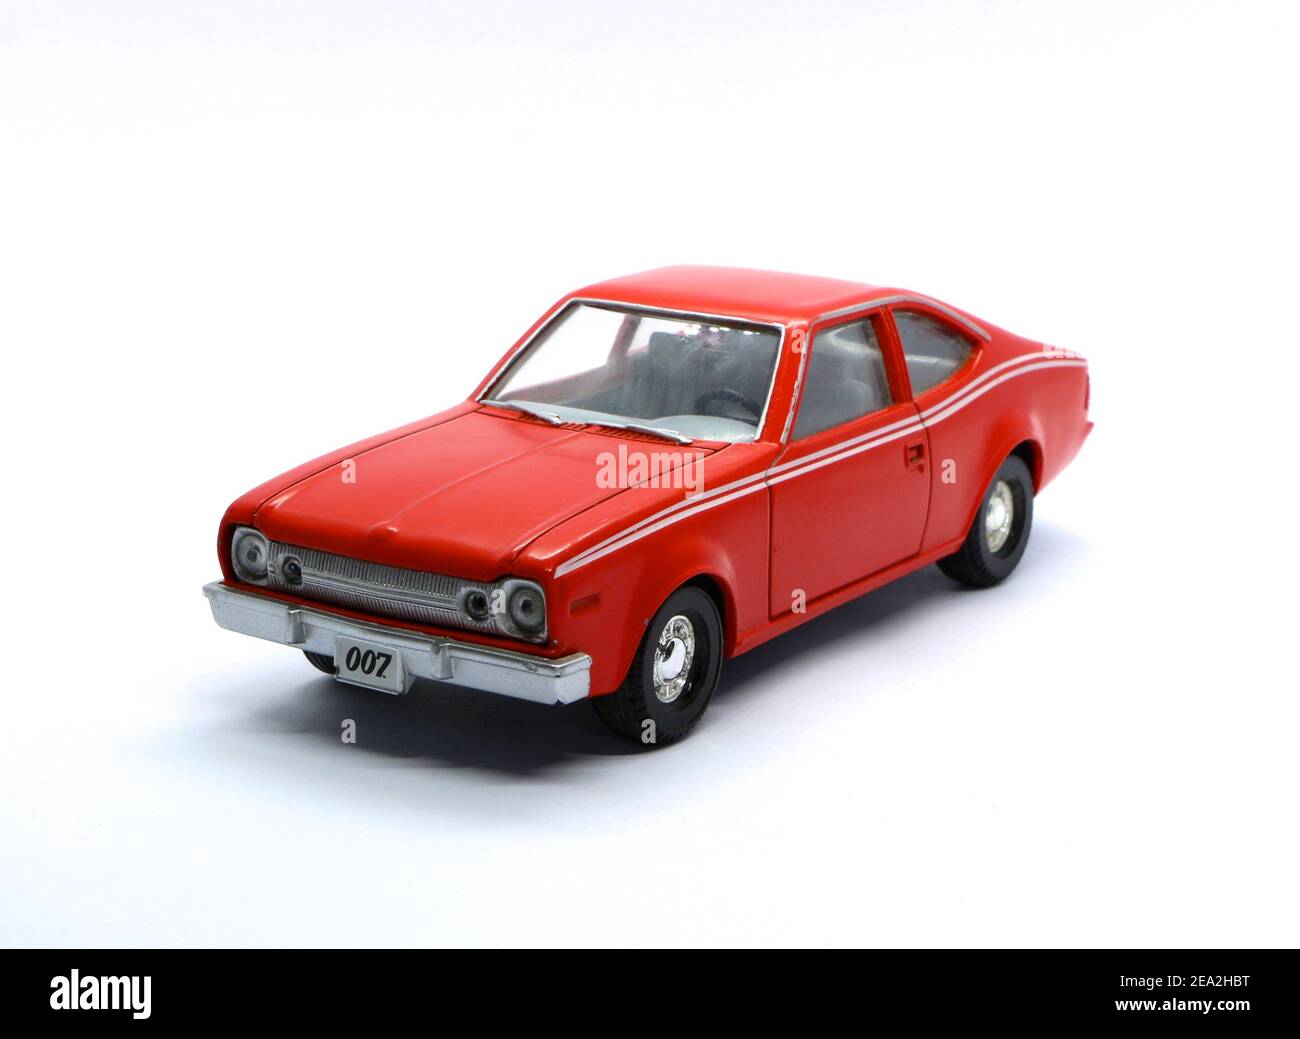 Photo of a Red AMC Hornet Corgi die cast model from the Roger Moore James Bond 007 film Man with the Golden Gun 1974 front three quarters view Stock Photo